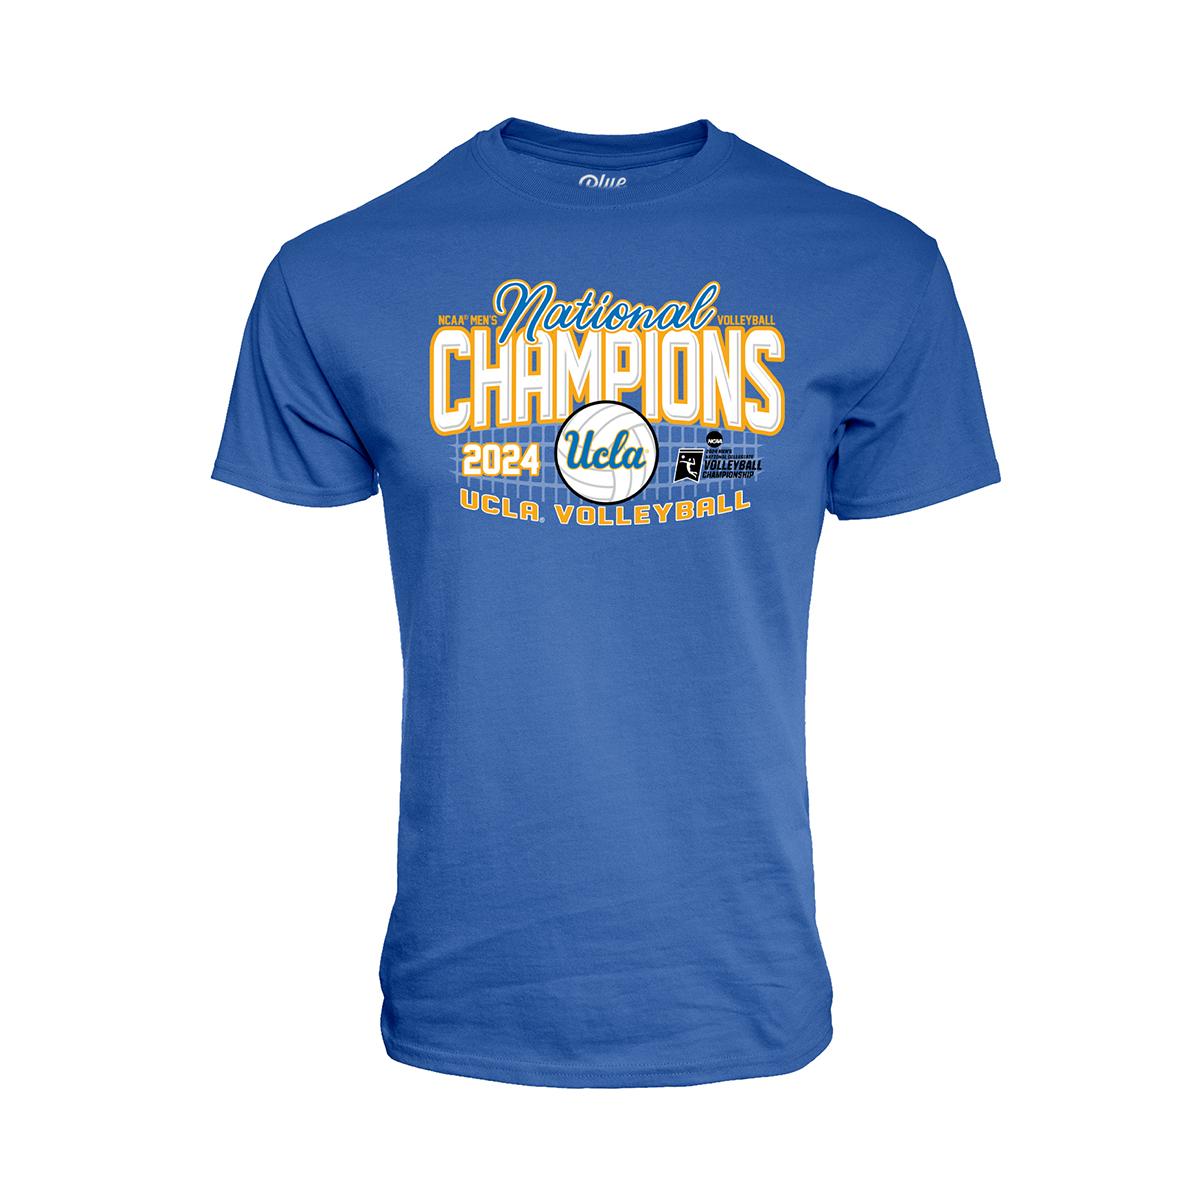 UCLA Mens's Volleyball National Champions T-shirt